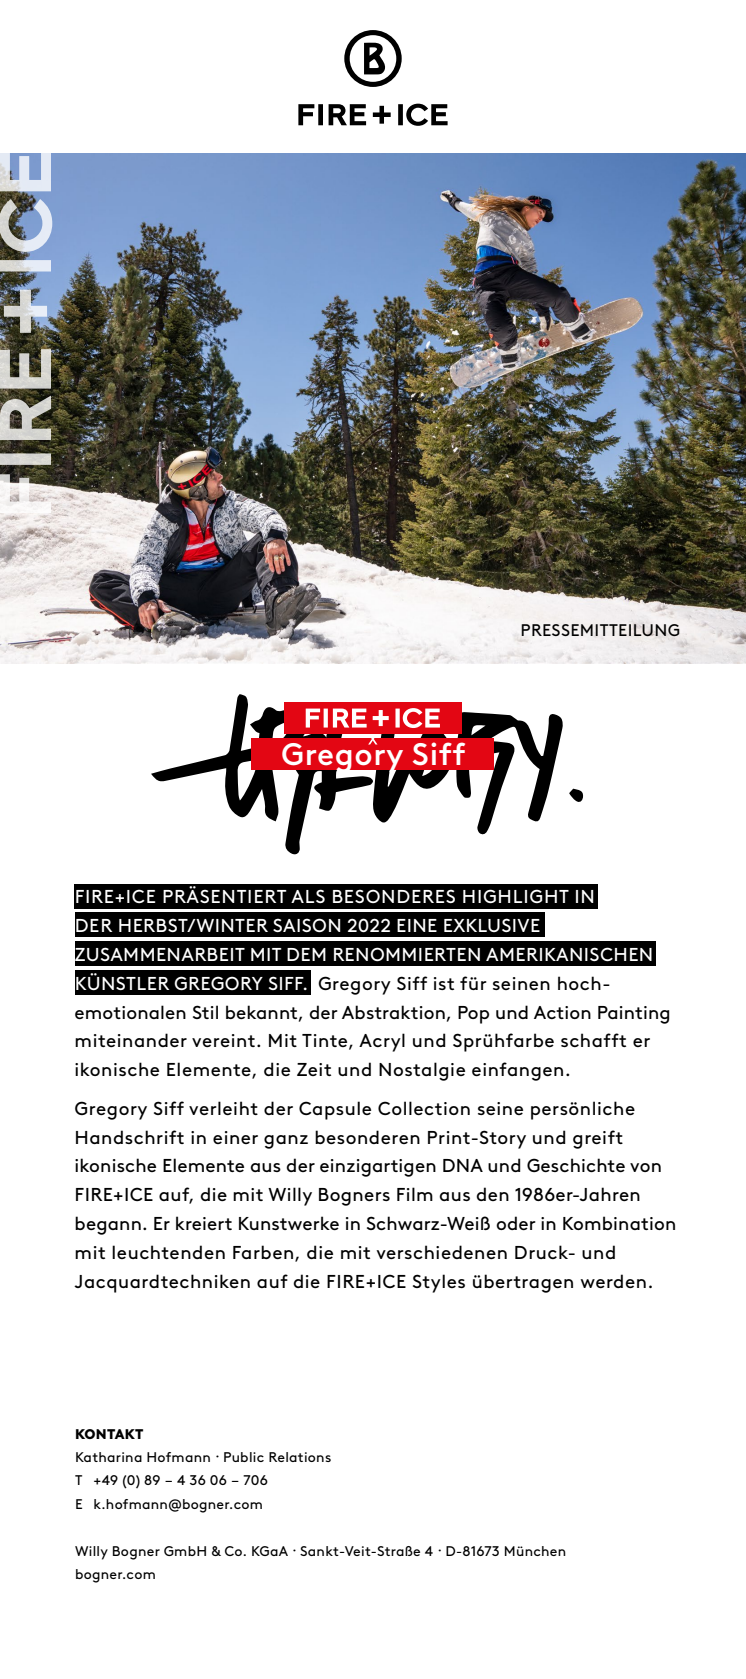 FIRE+ICE_Pressemitteilung_Gregory Siff Capsule Collection.pdf